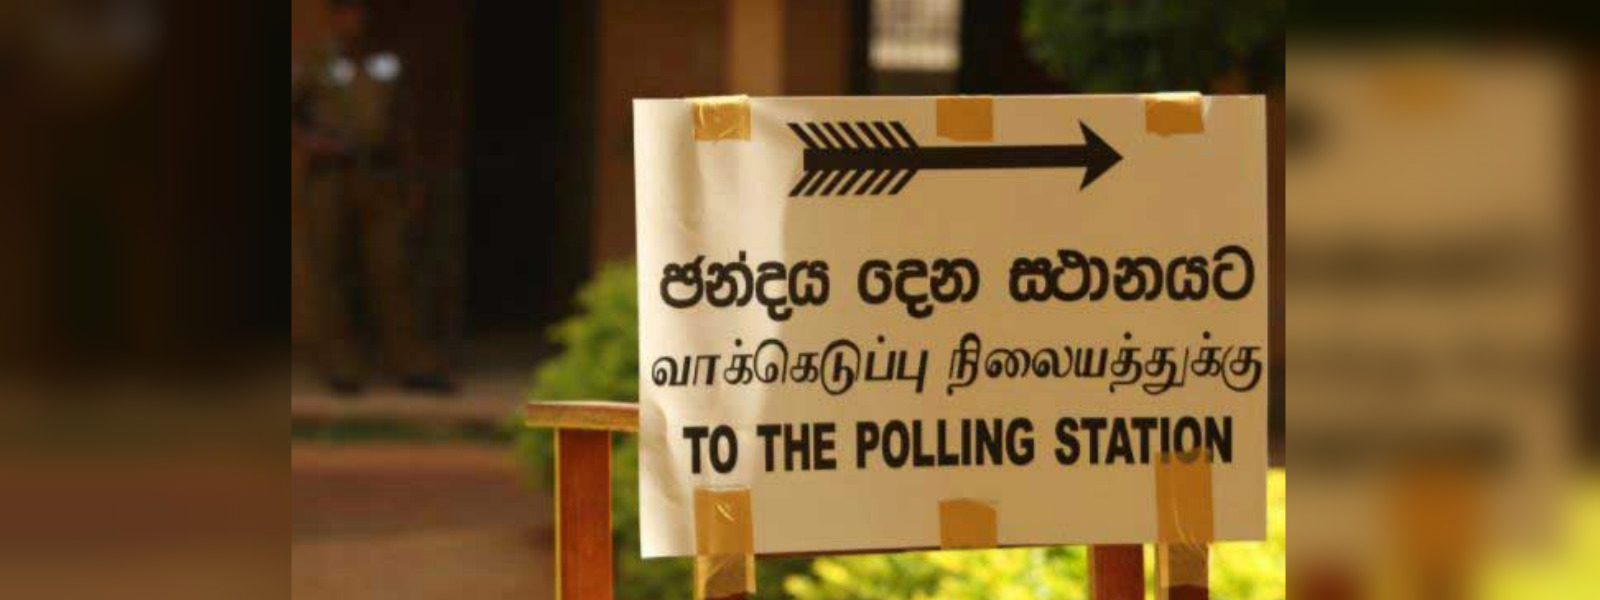 Presidential Election 2019 - Polls closed